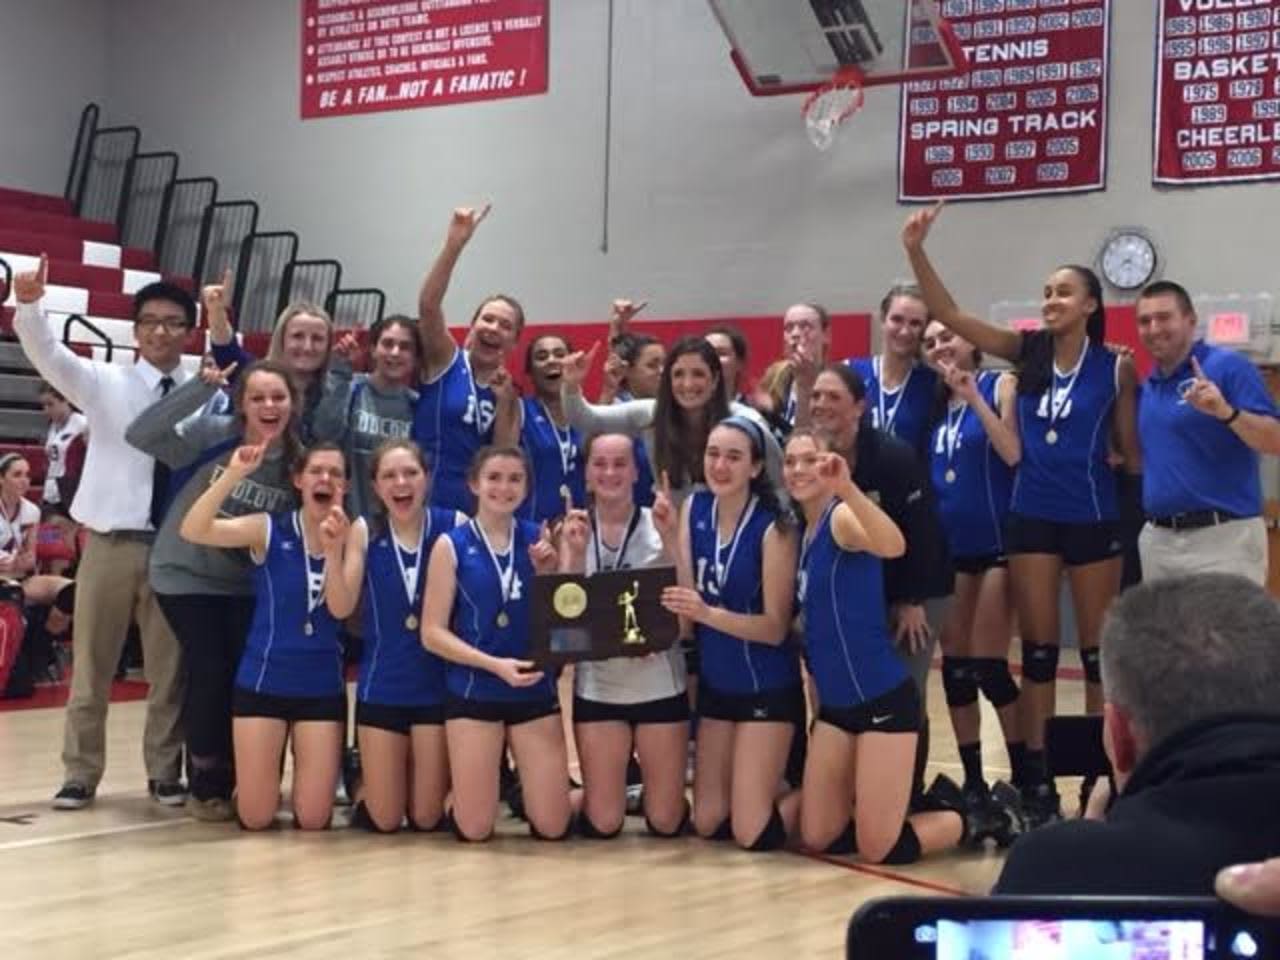 The girls volleyball team from Fairfield Ludlowe High celebrates after winning the state title.